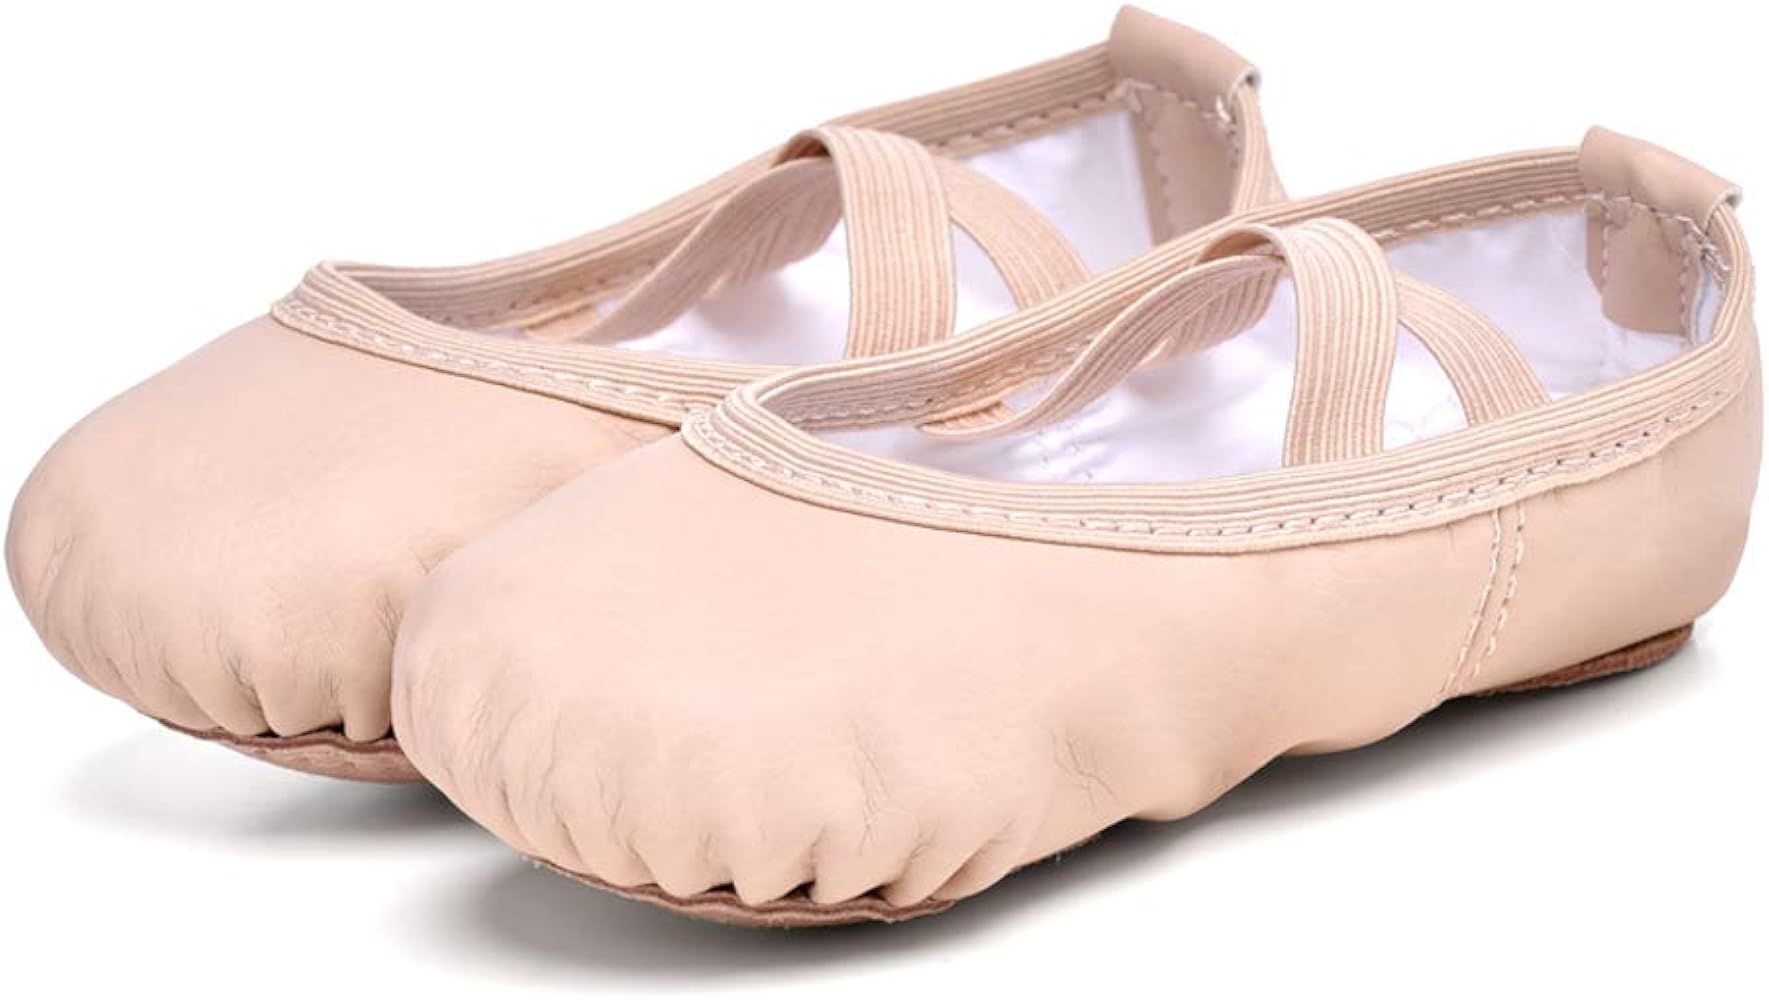 Stelle Girls Ballet Practice Shoes, Yoga Shoes for Dancing | Amazon (US)